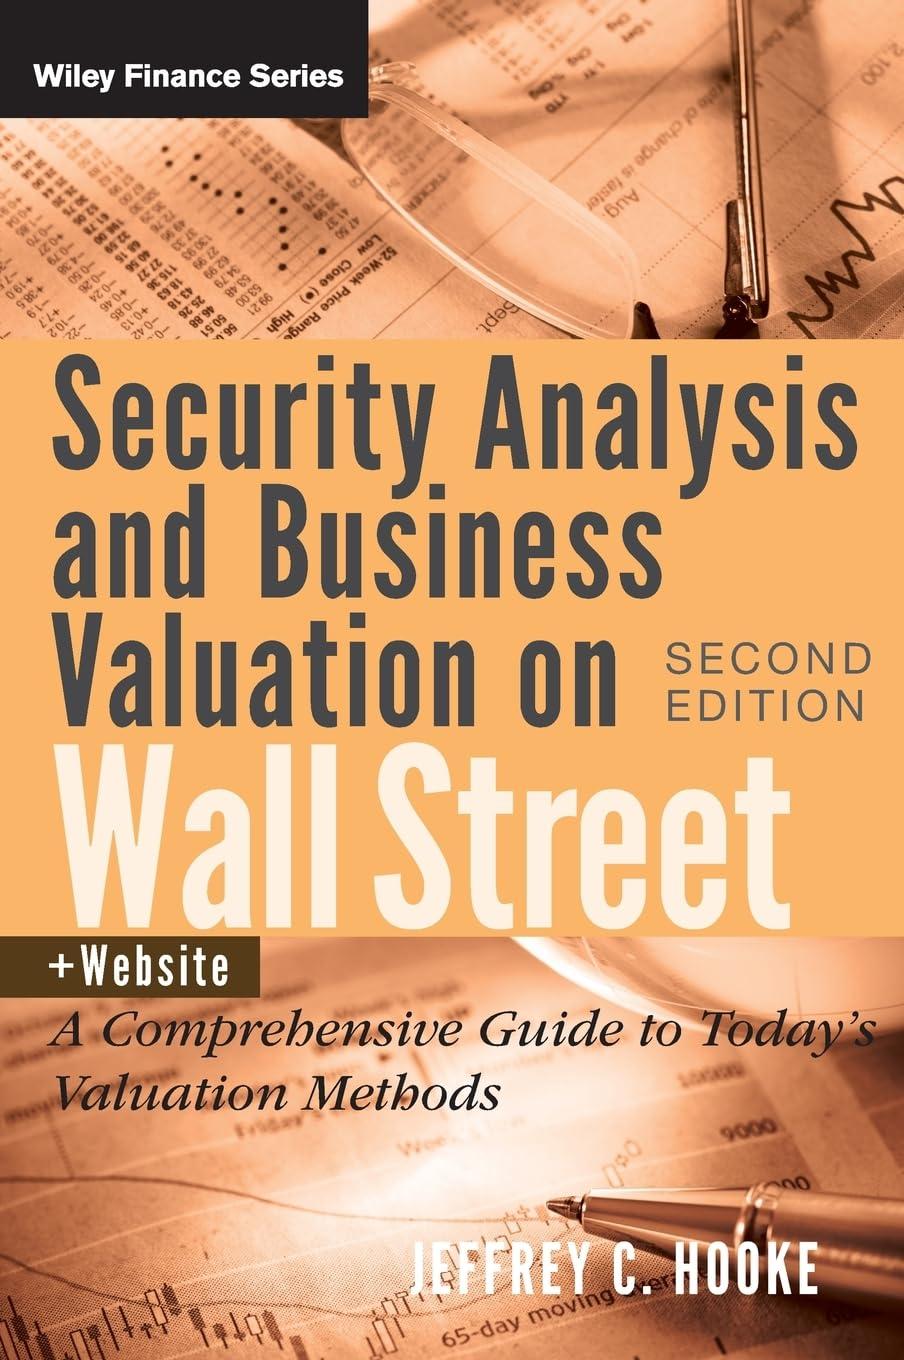 security analysis and business valuation on wall street plus companion web site a comprehensive guide to